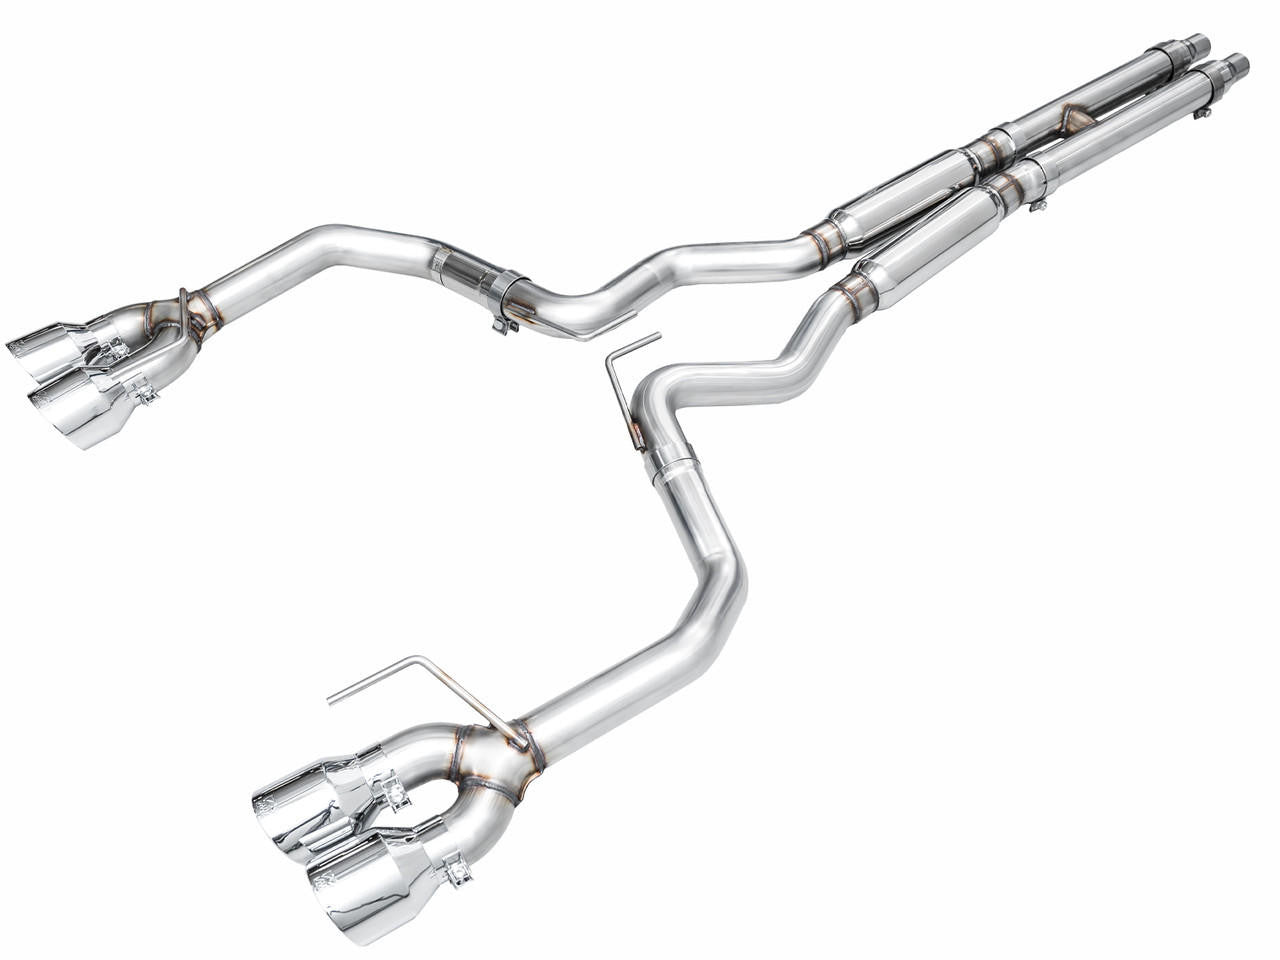 AWE Tuning AWE SwitchPath Exhaust for S650 Mustang GT Fastback - Quad Chrome Silver Tips 3025-42650 